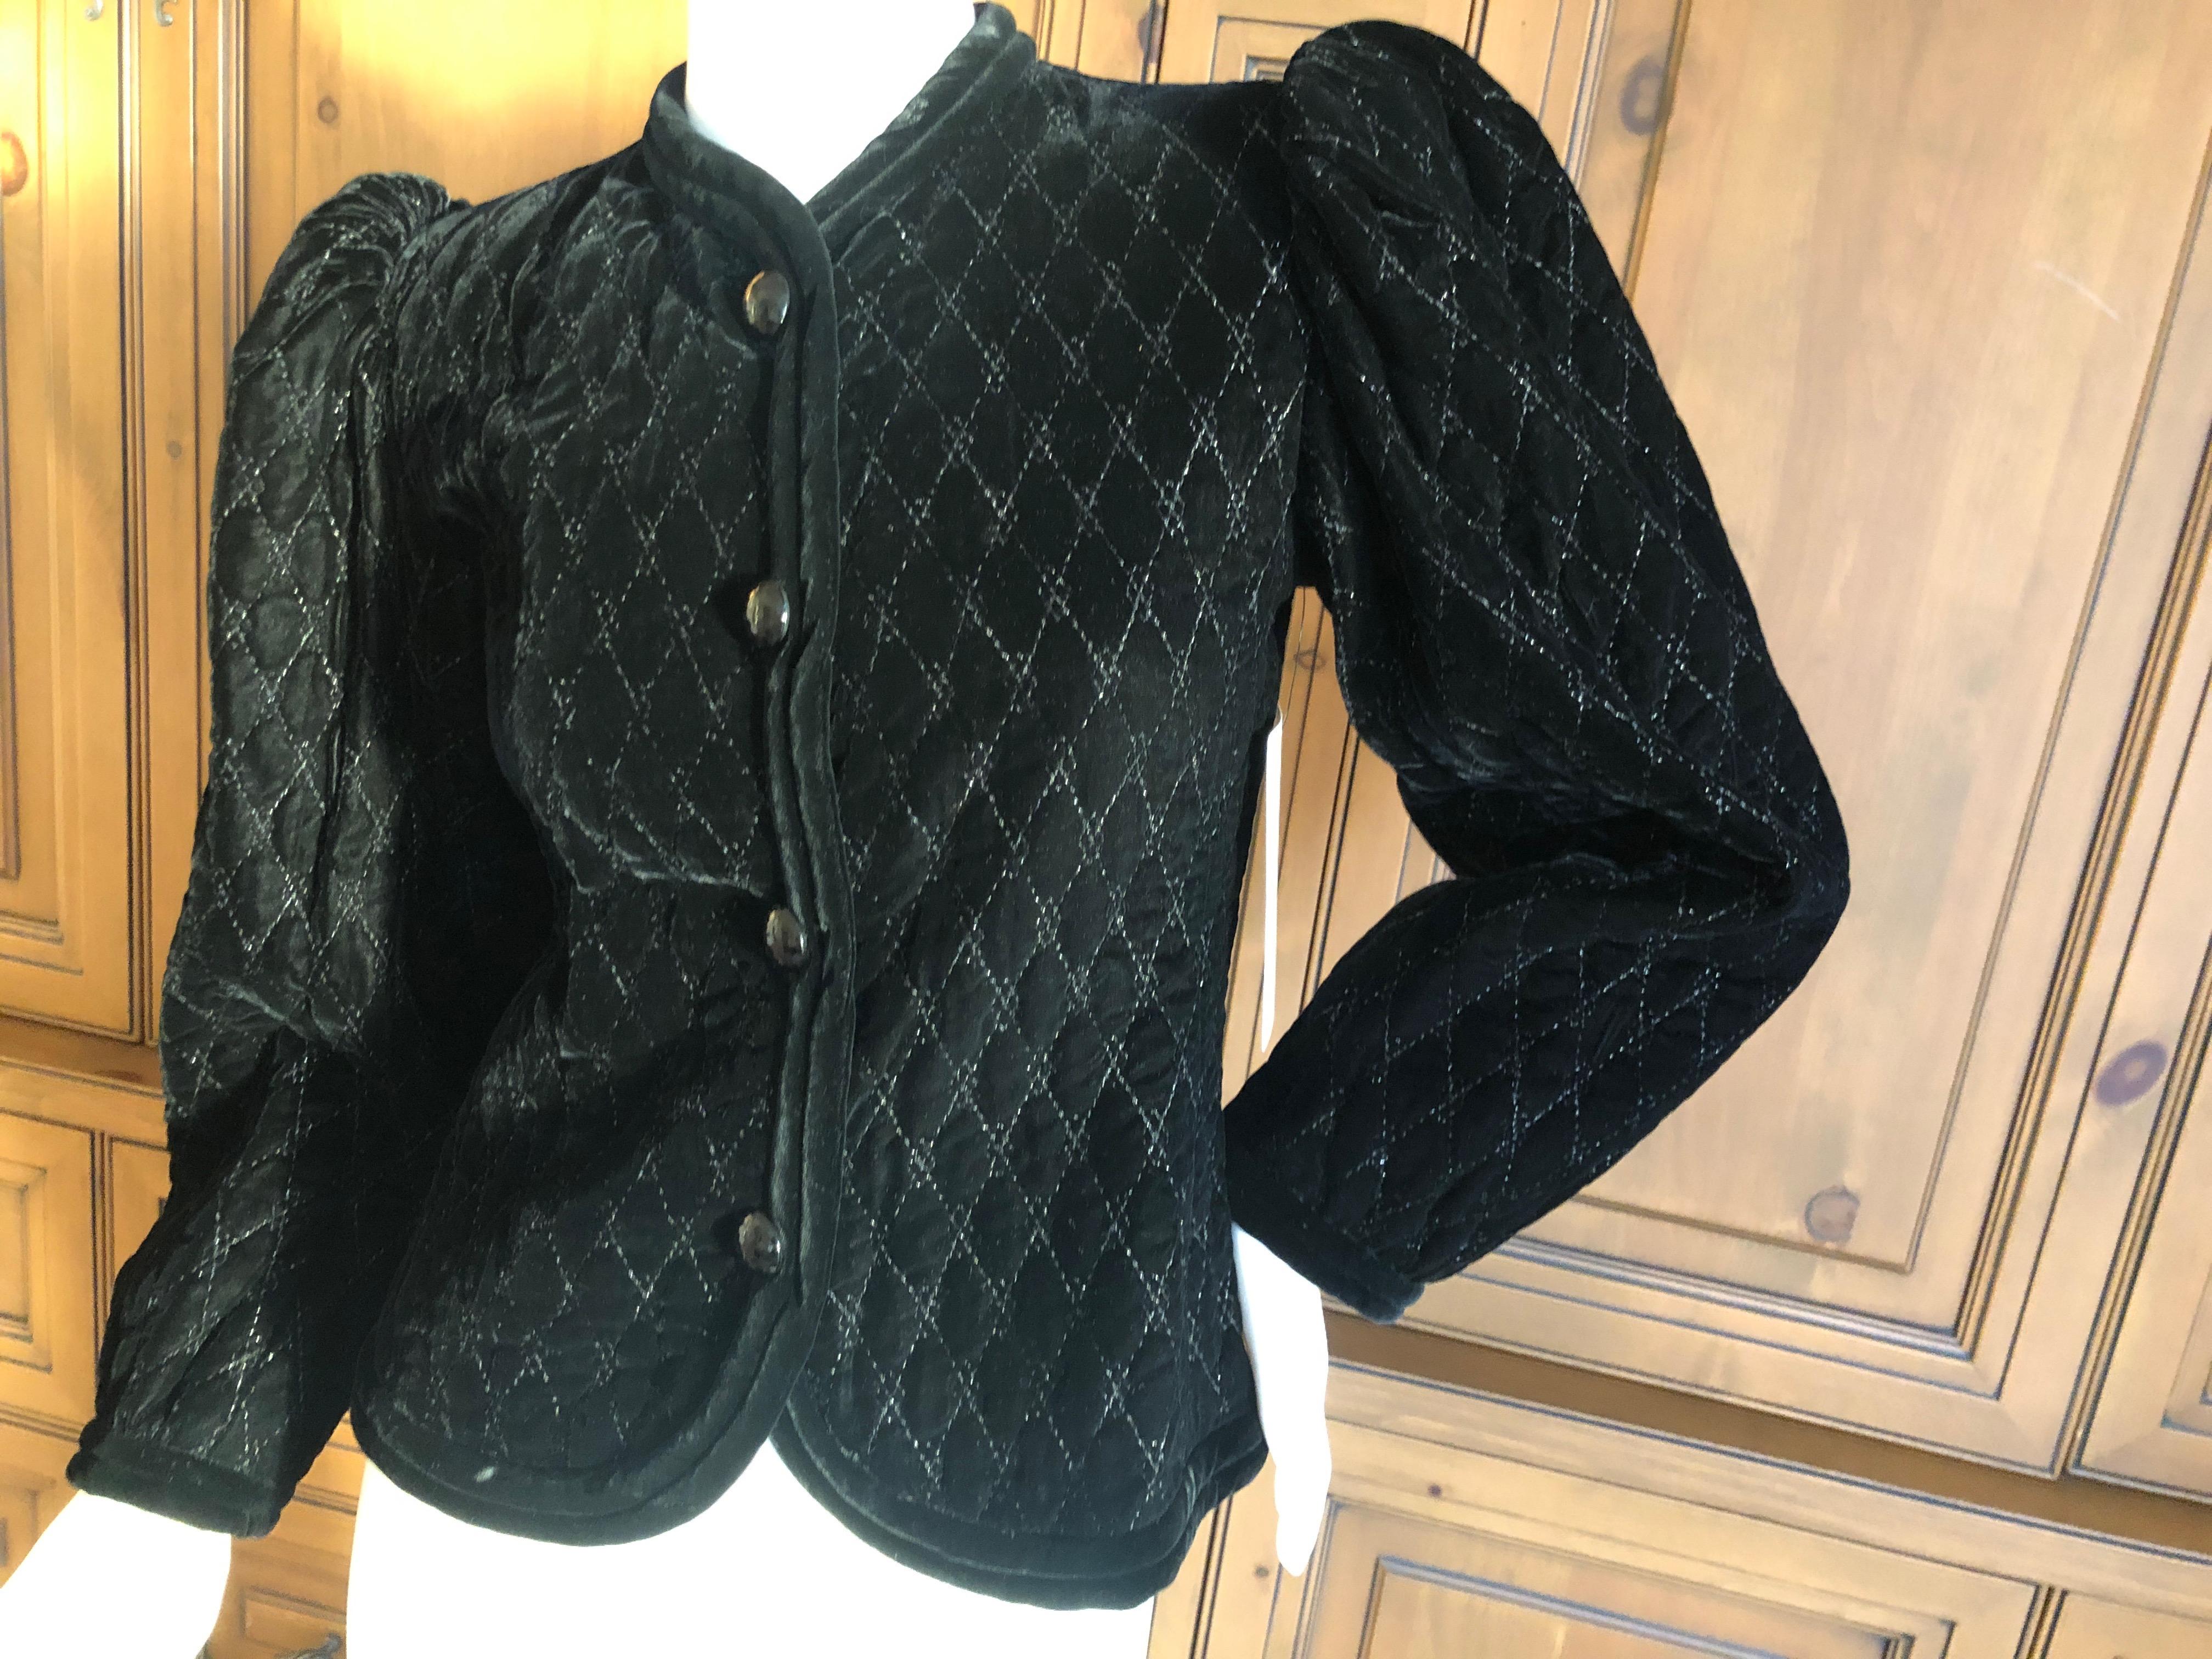 Yves Saint Laurent Rive Gauche 1979 Black Velvet Jacket w Gold Thread Quilting In Excellent Condition For Sale In Cloverdale, CA